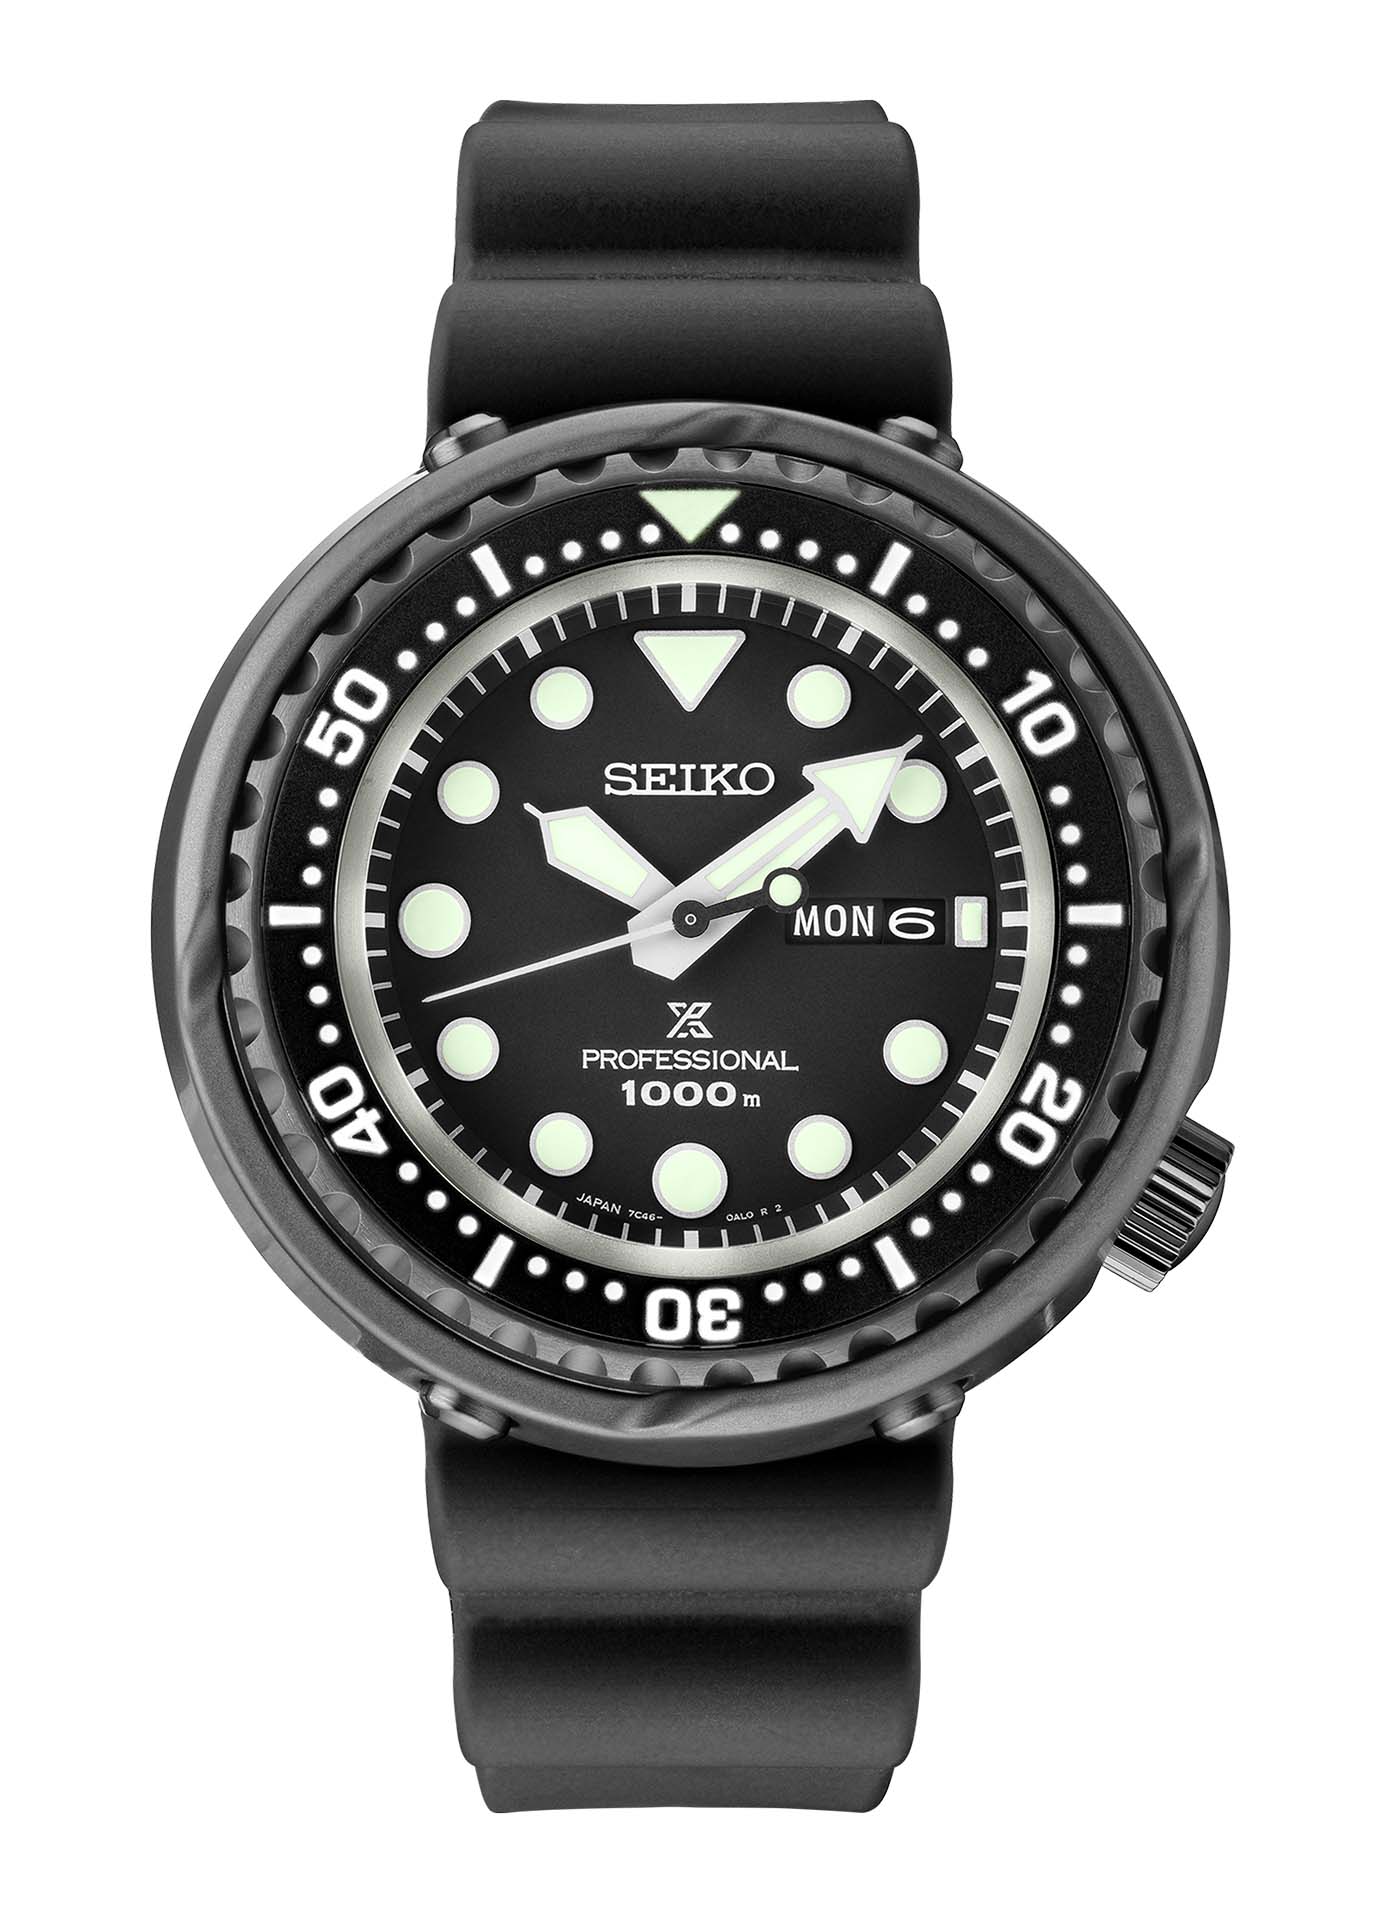 Seiko LUXE PROSPEX 1975 Saturation Diver's Watch S23631 Image